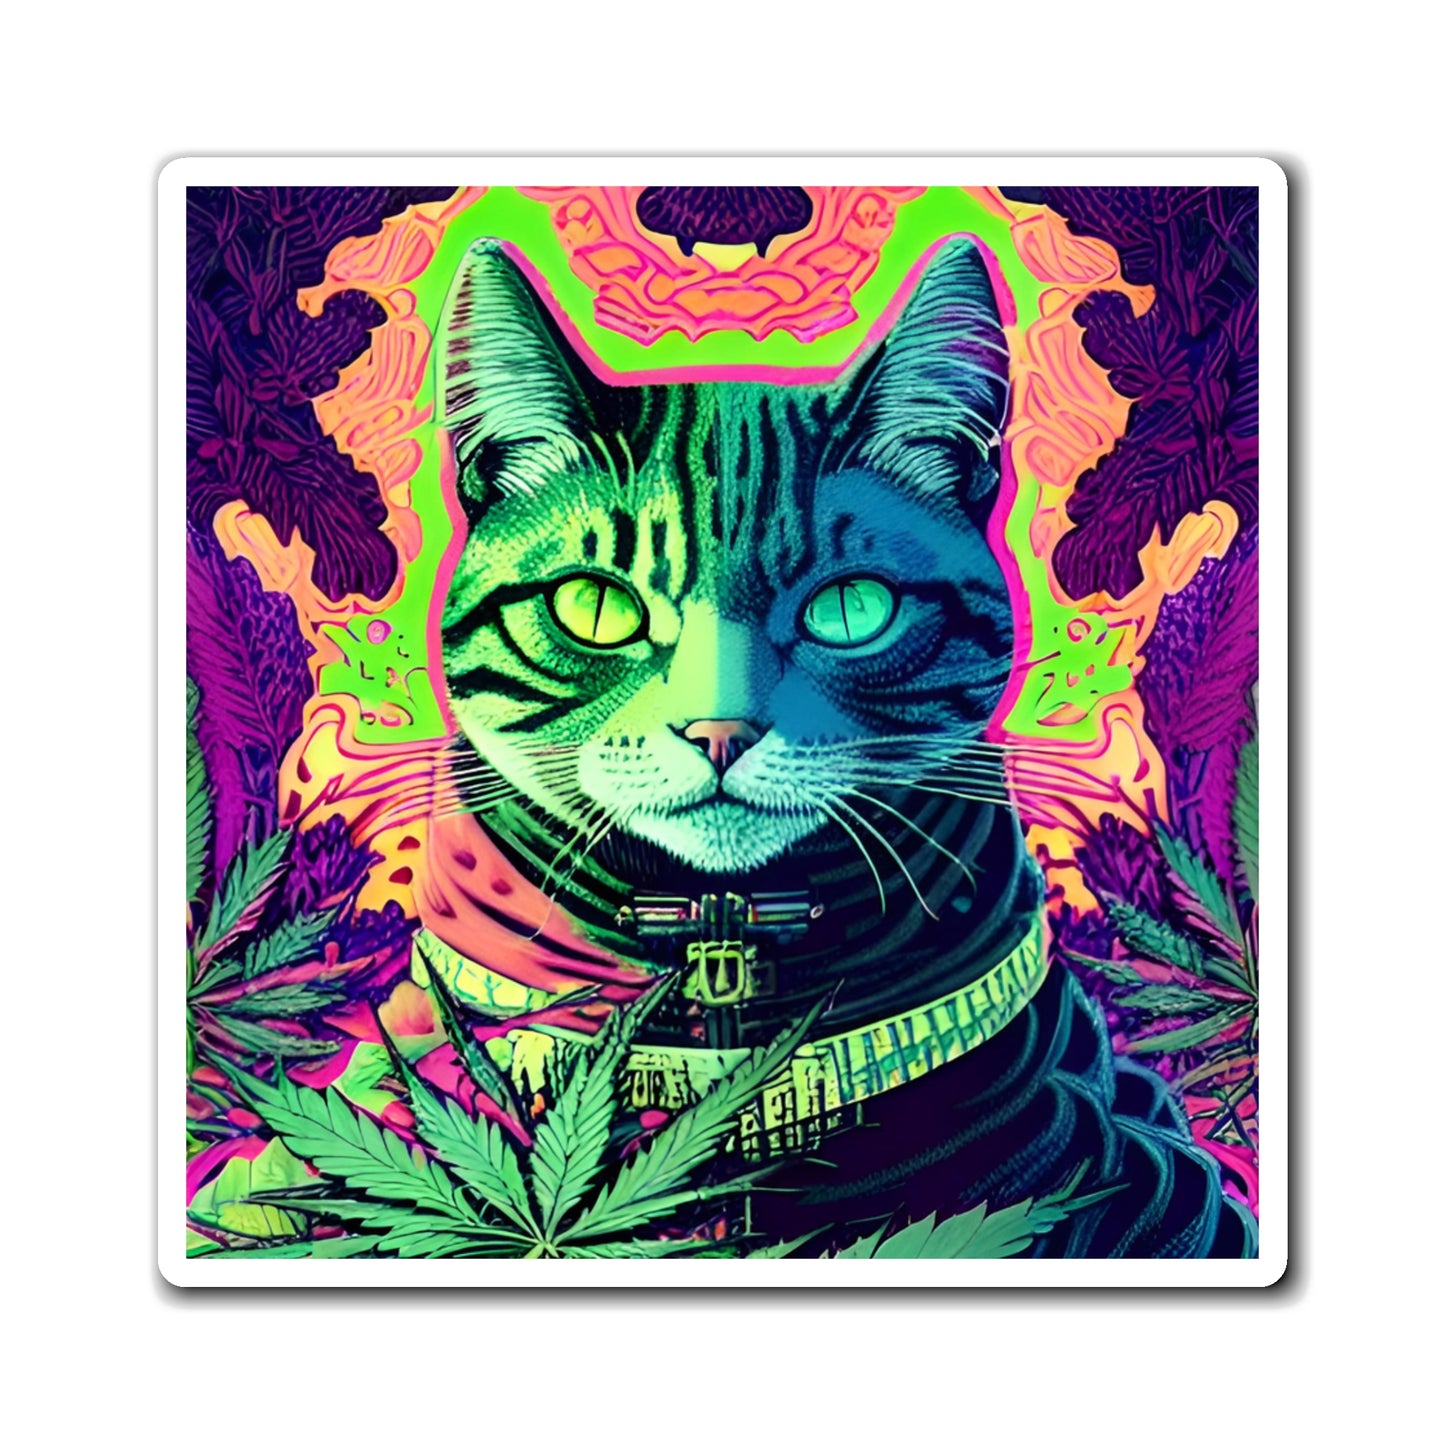 Cannabis Kitty Magnet No. 4 - A Unique Delight 3" x 3" Decorative Accent Gift for Cat & Cannabis Lovers!